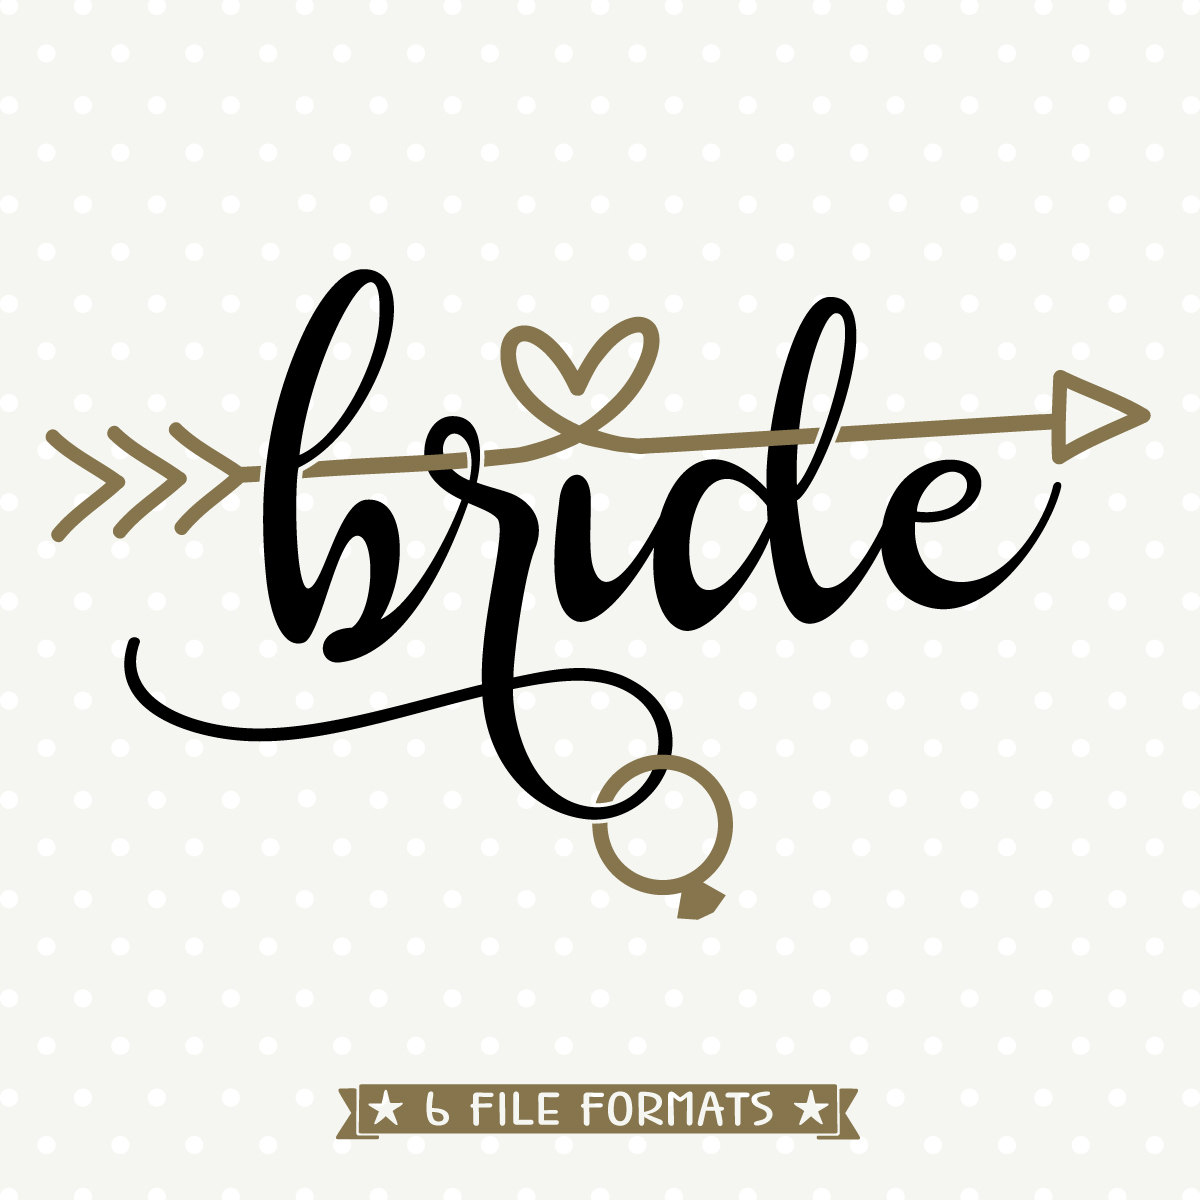 Download Bride DXF file, DIY Bridal Party Shirt, Wedding svg file, DXF cutting file, Commercial cut file ...